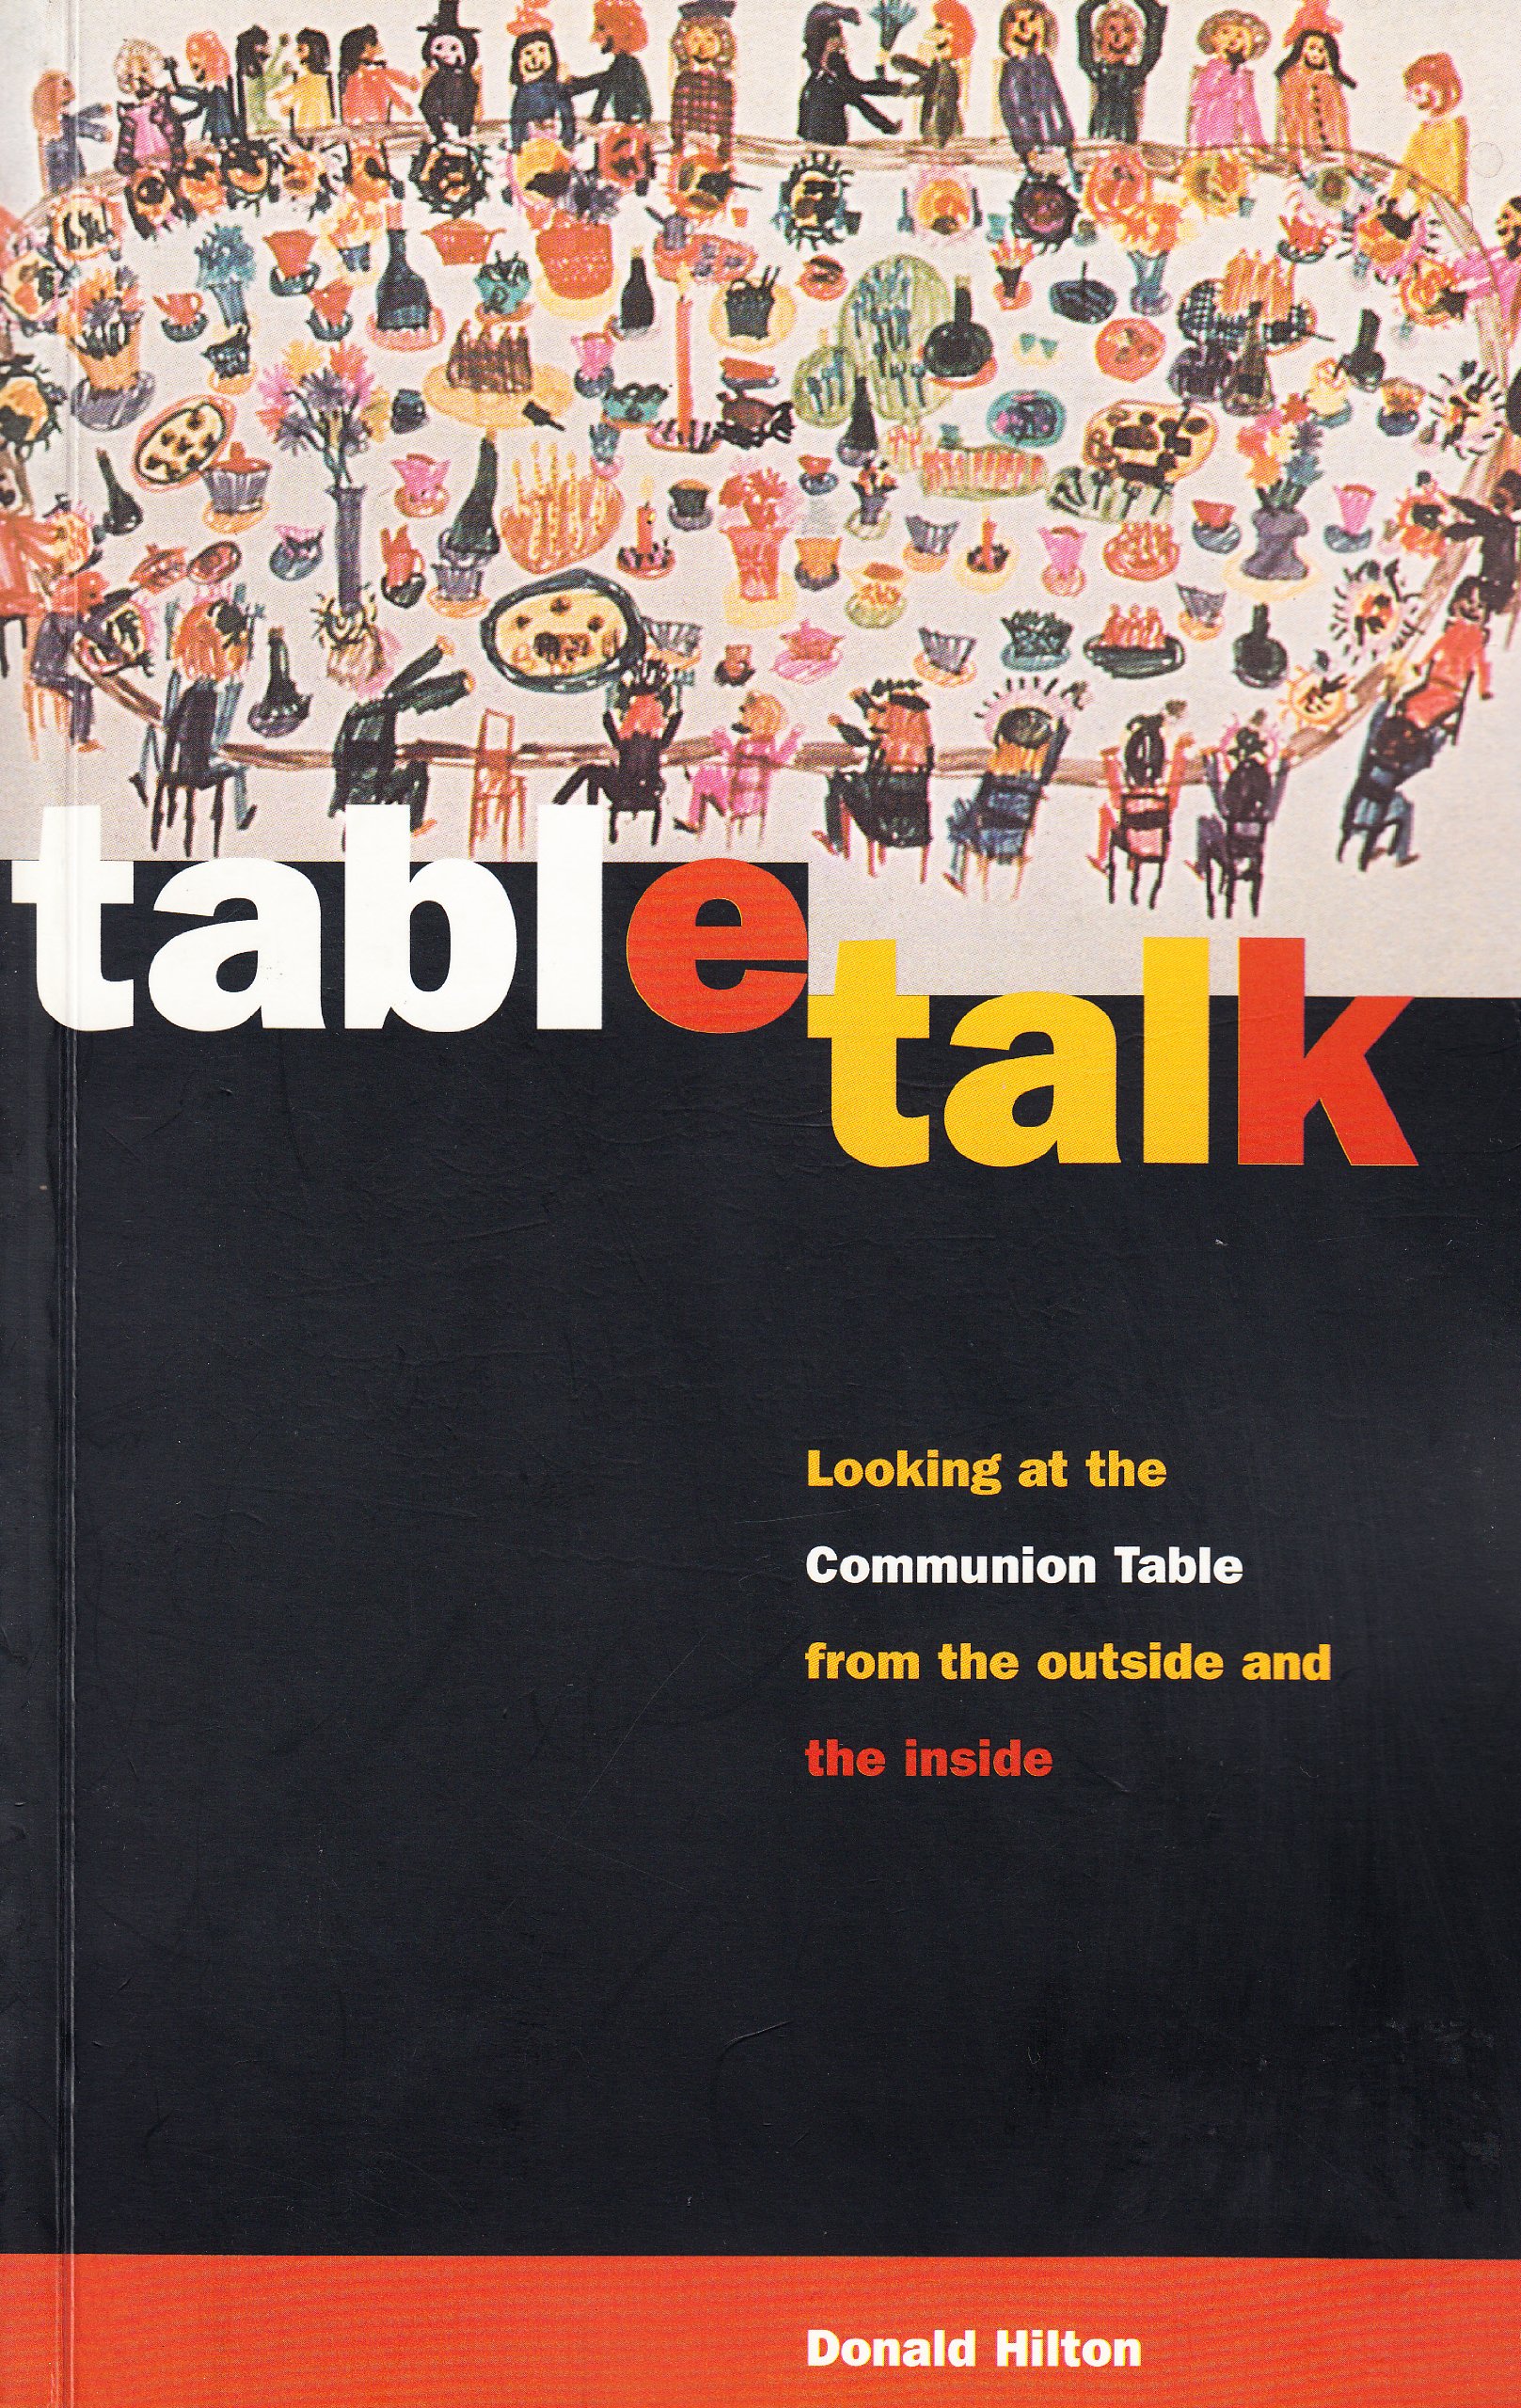 Cover of Table Talk